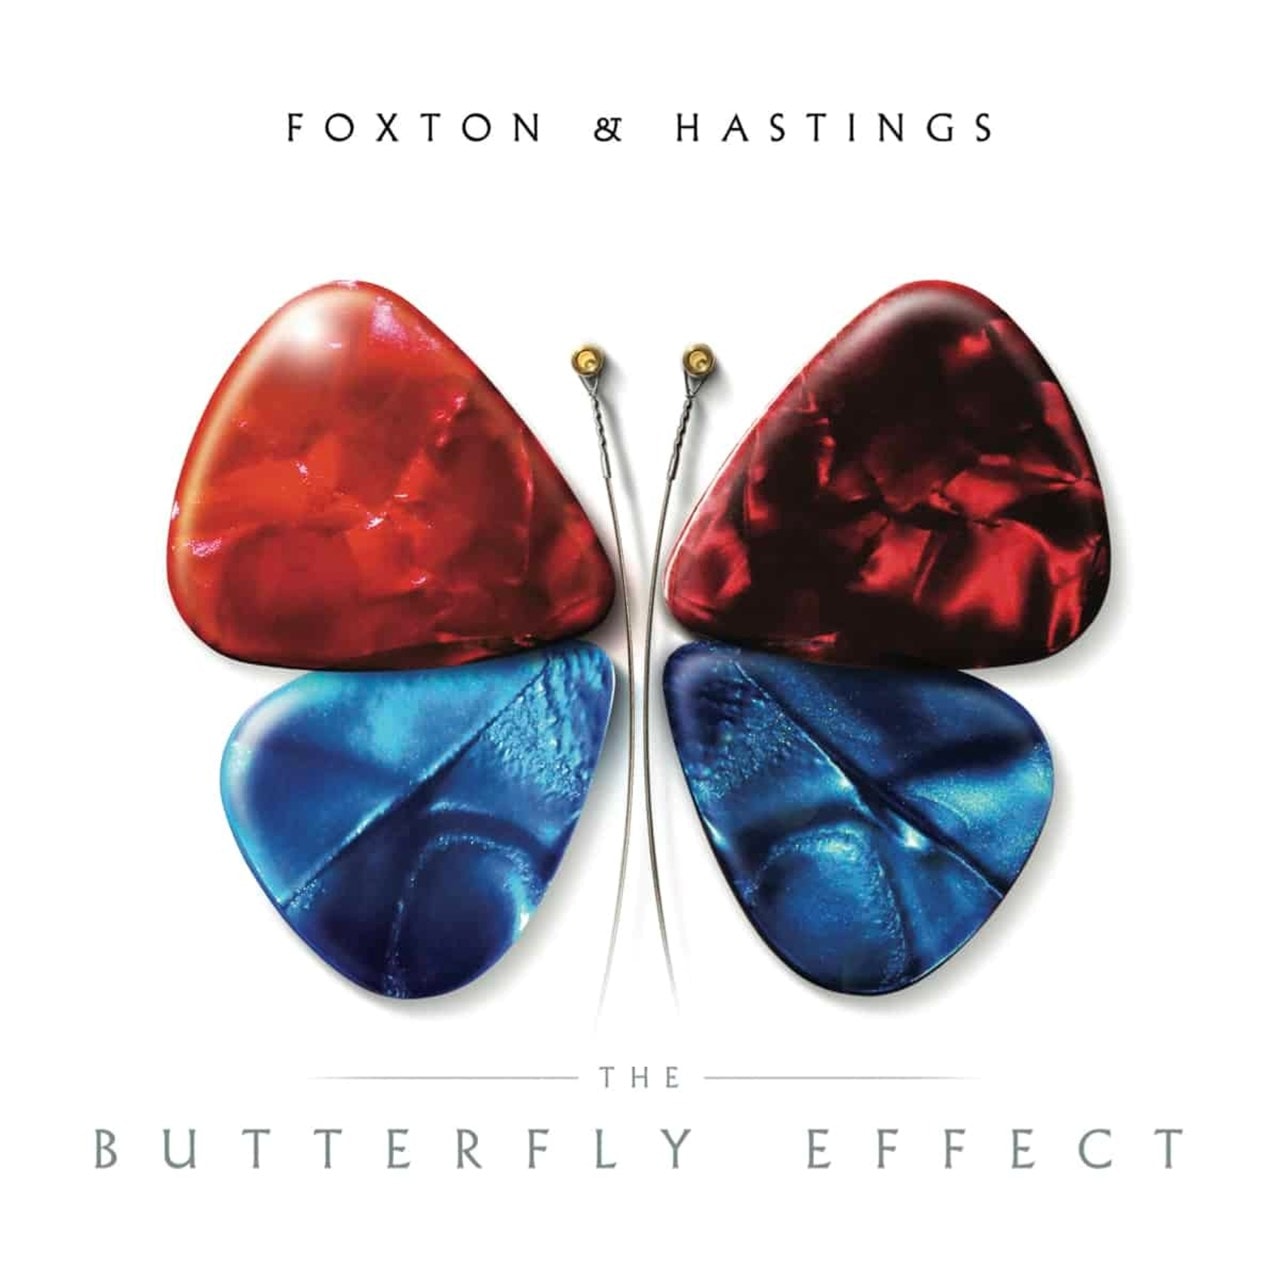 The Butterfly Effect Cd Album Free Shipping Over 20 Hmv Store